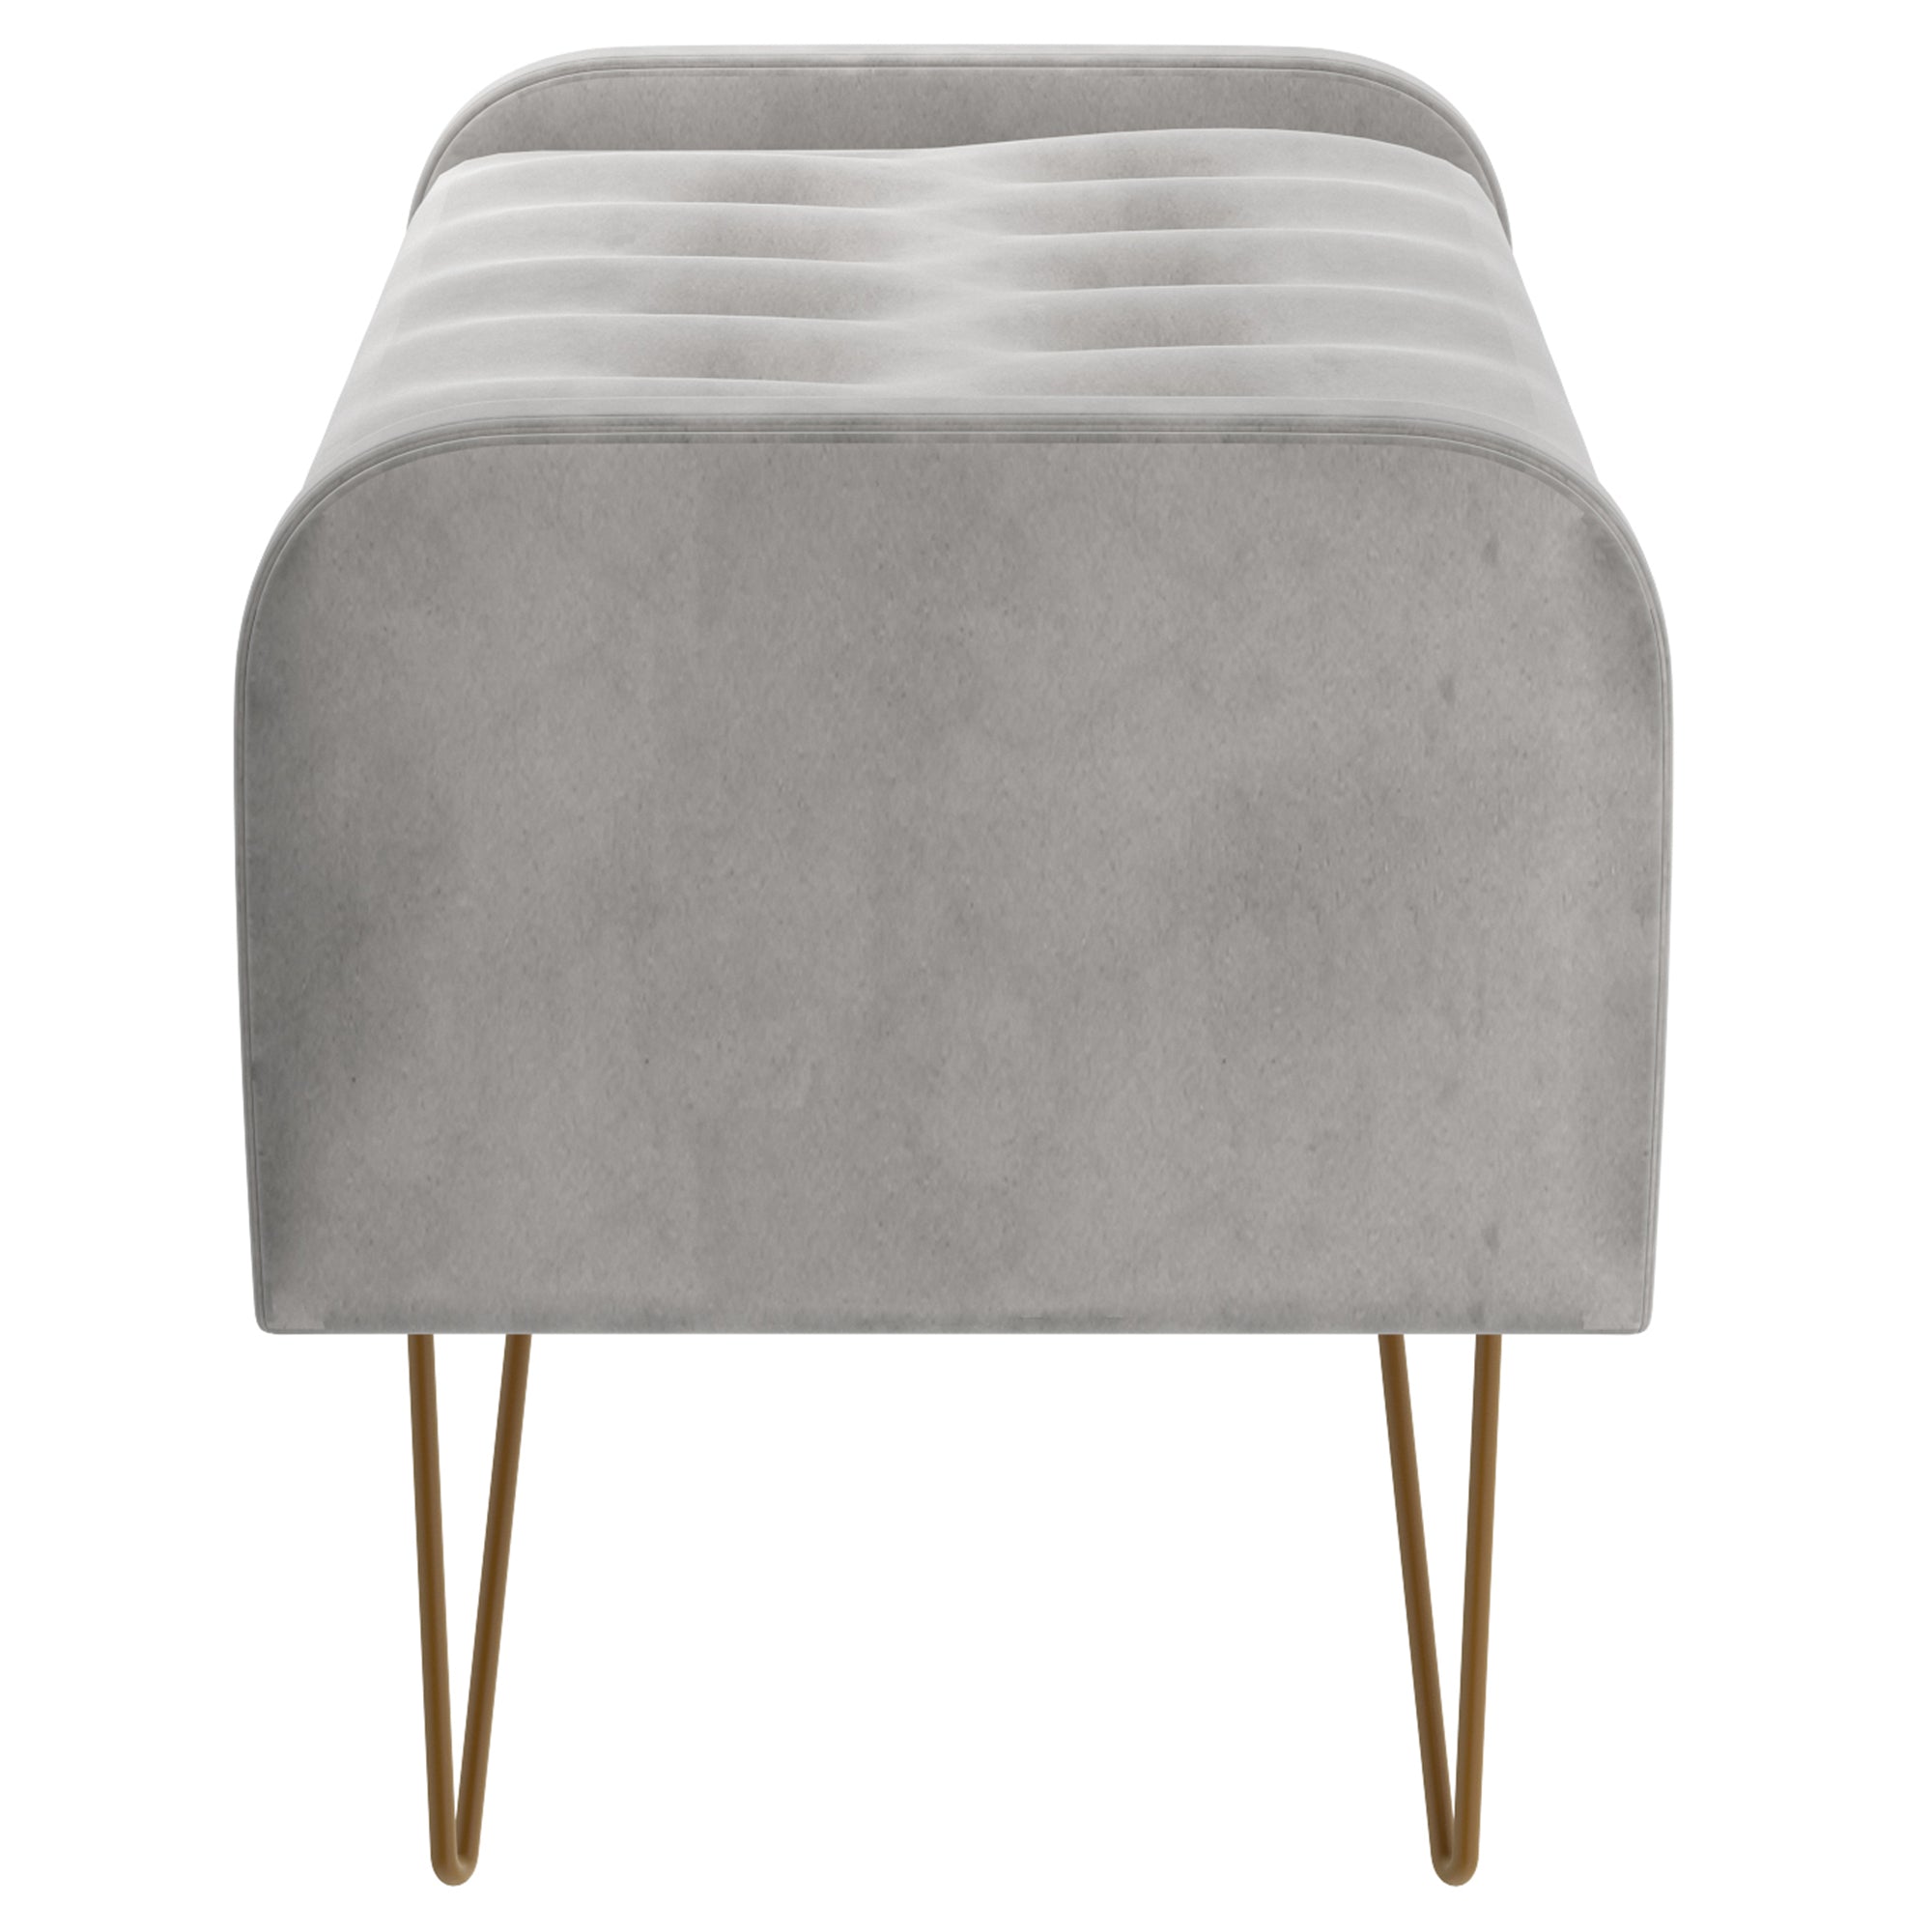 Sabel Storage Ottoman/Bench in Grey and Aged Gold 402-549GRY/GL